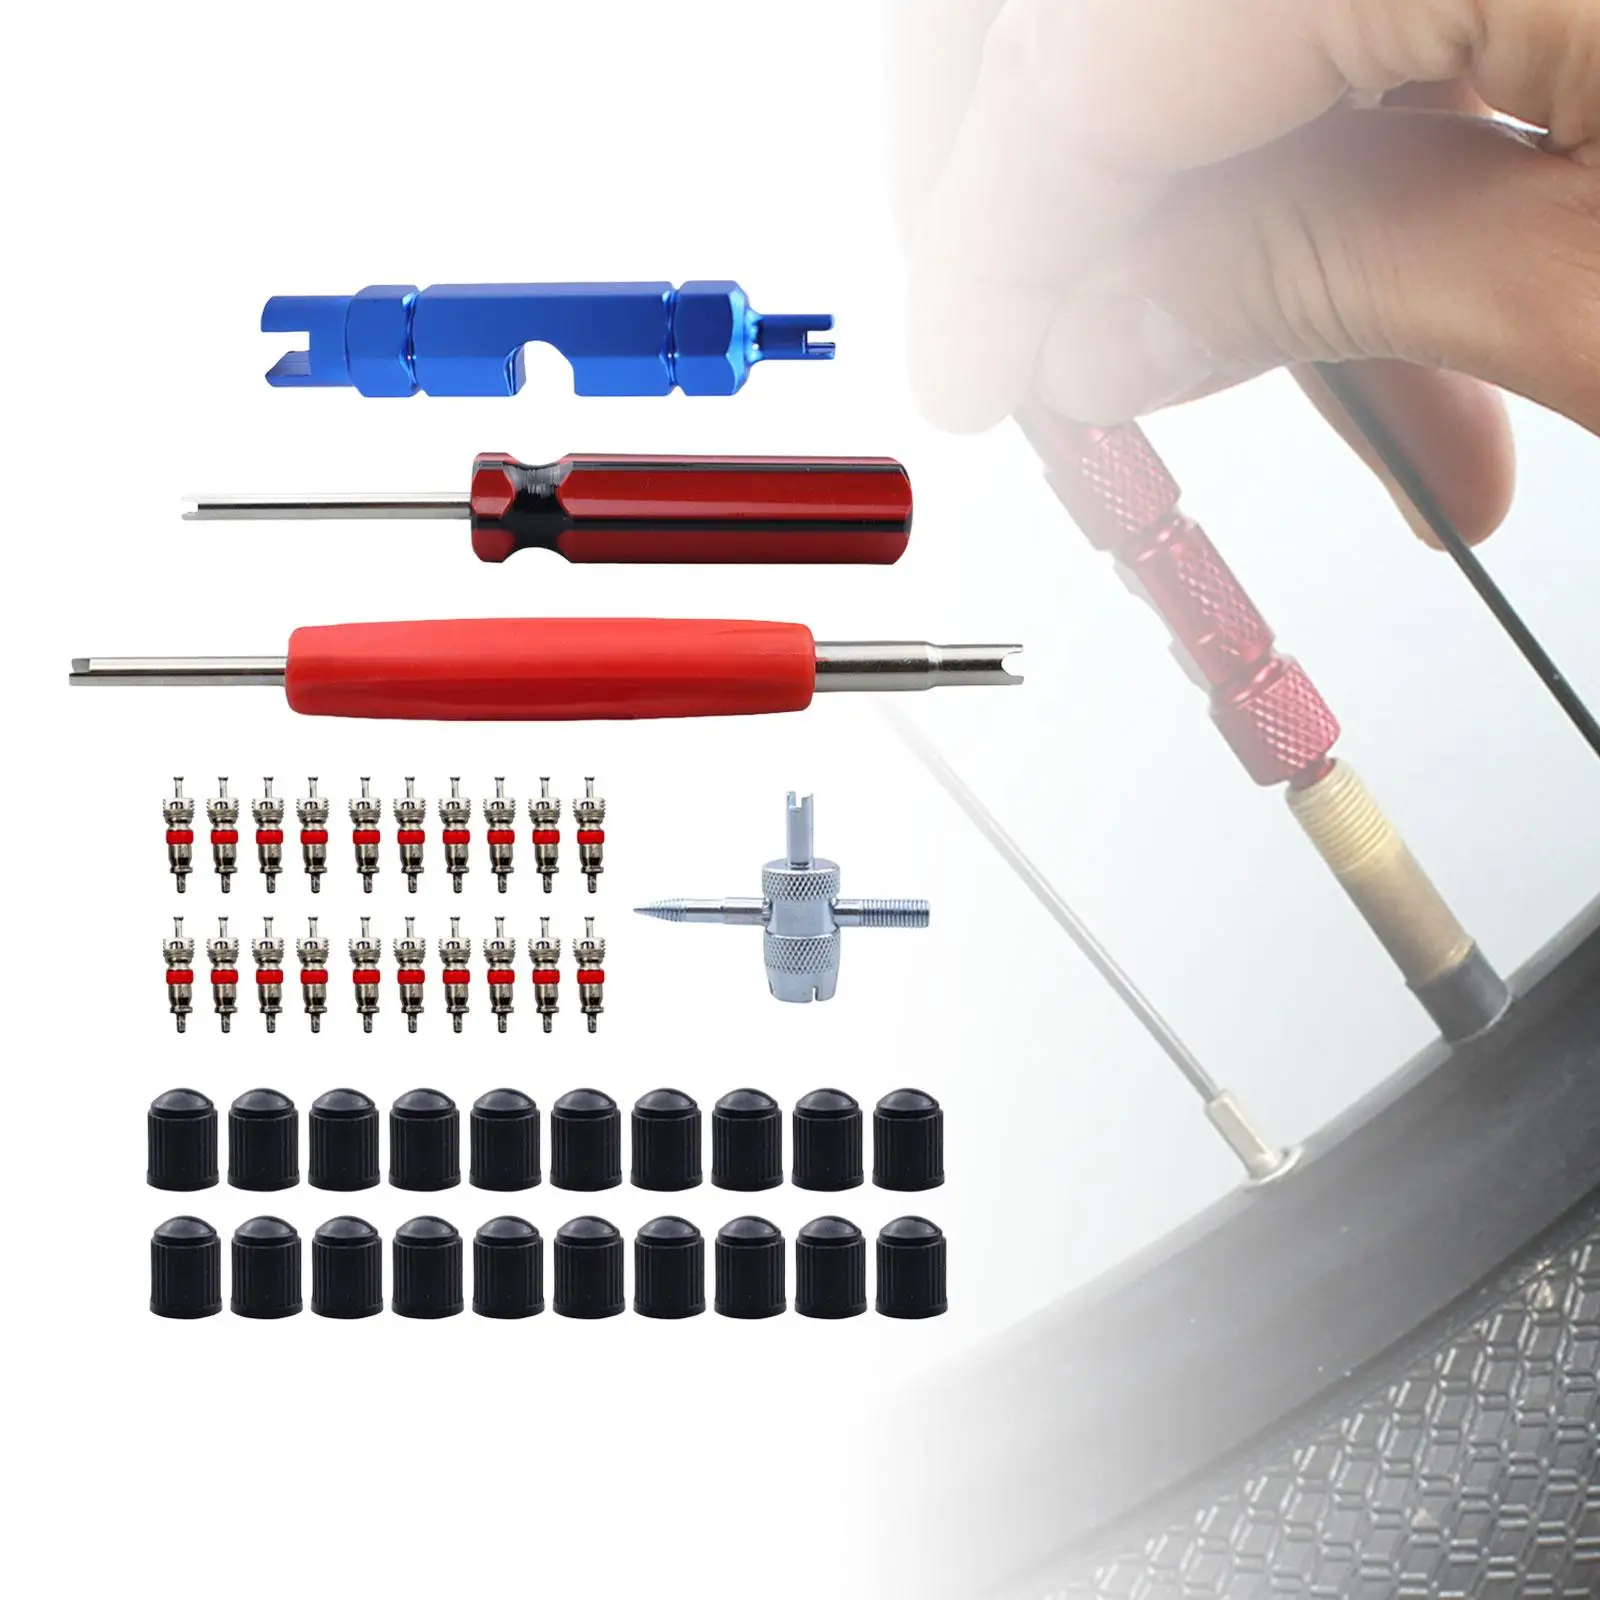 Valve Stem Removal Tool Valve Stem Caps Car Accessories Valve Core Remover Tool for Bicycle Motorcycle Truck Bike Auto